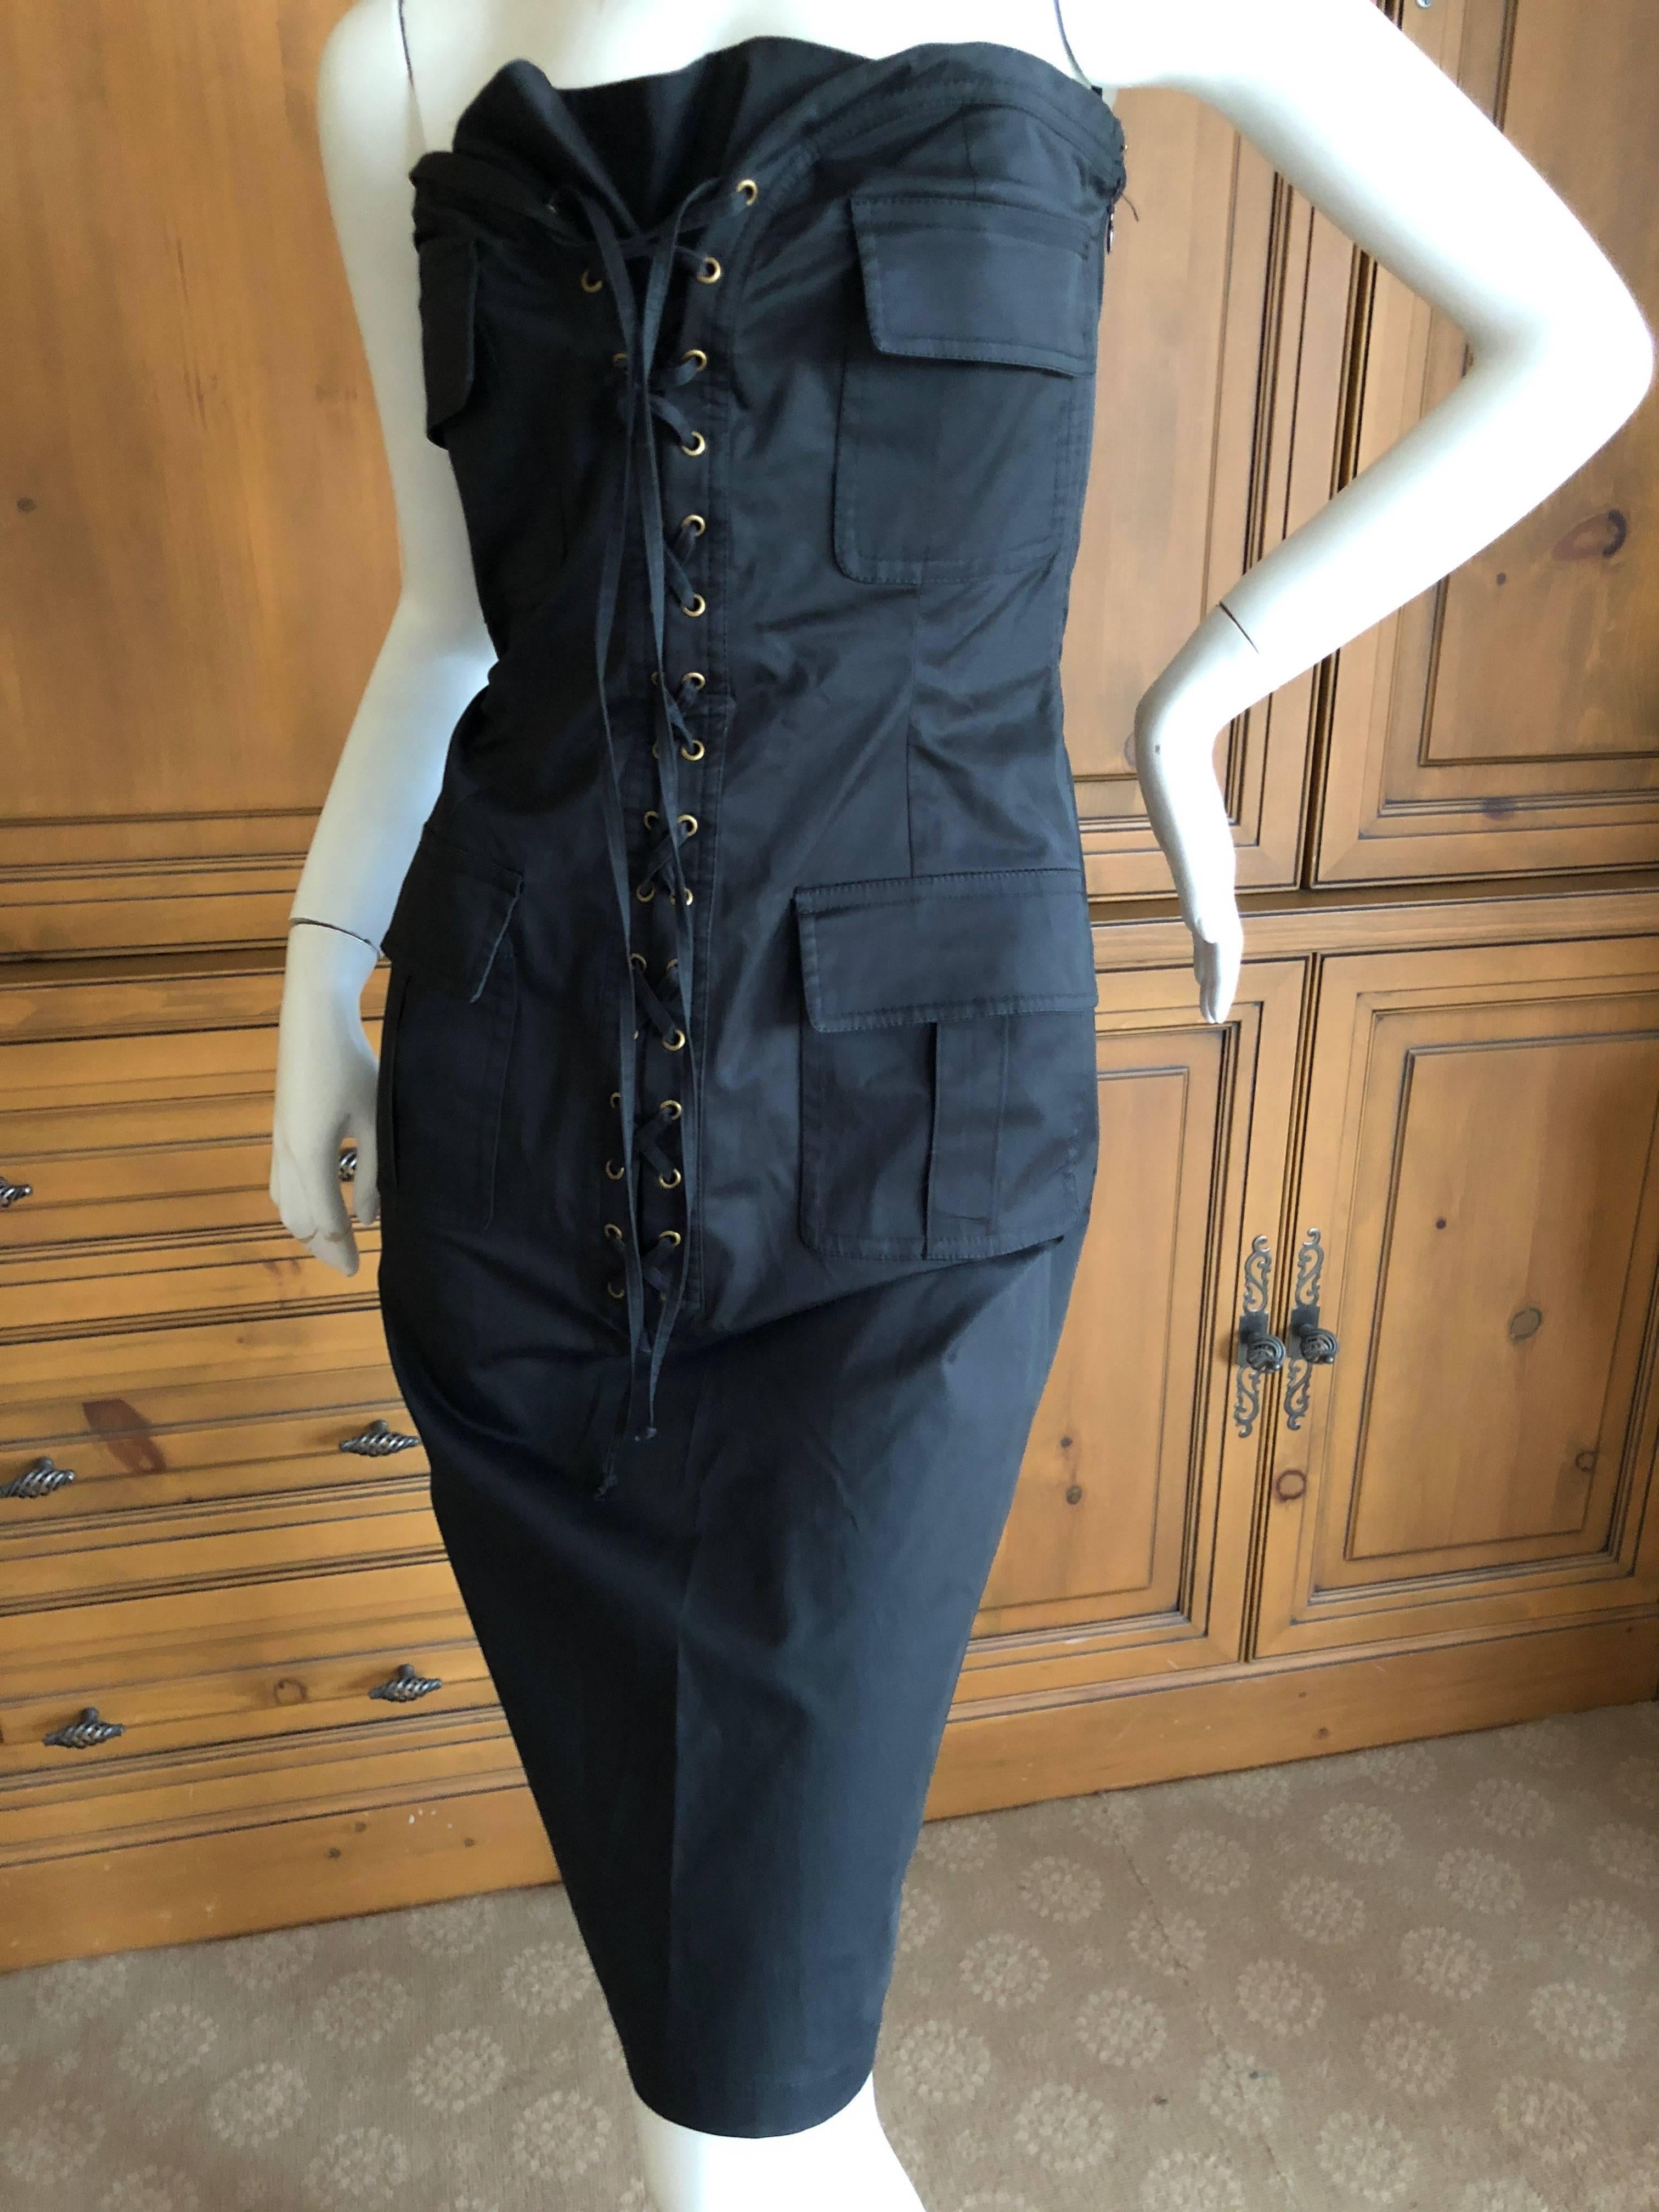 Yves Saint Laurent by Tom Ford Strapless Black Safari Dress with Corset Lacing  In Excellent Condition For Sale In Cloverdale, CA